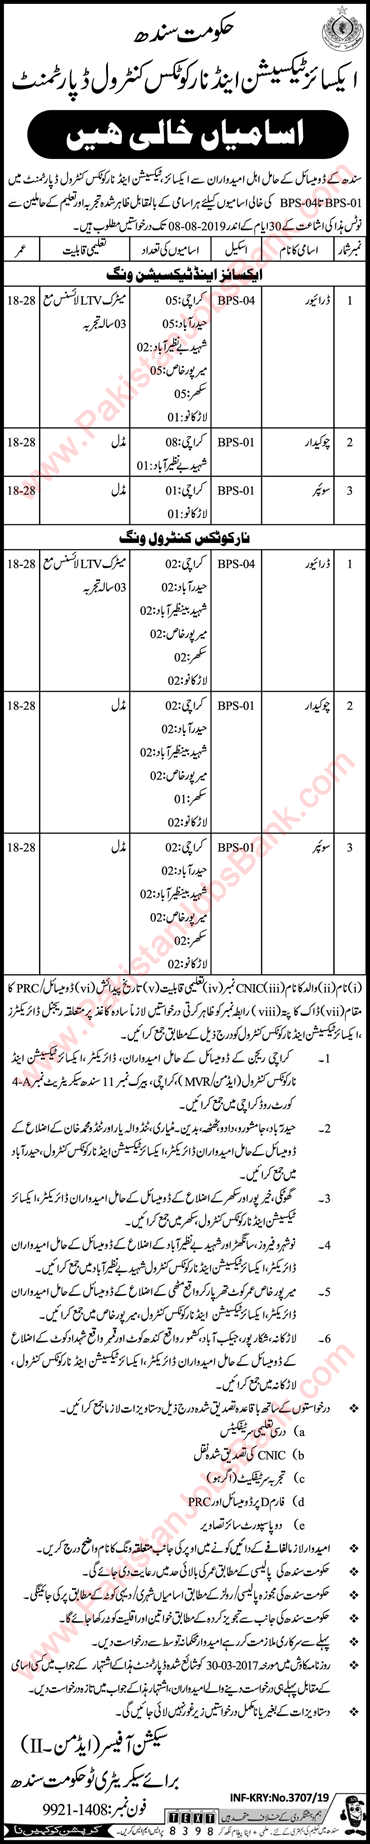 Excise Taxation and Narcotics Control Department Sindh Jobs July 2019 Drivers & Others Latest